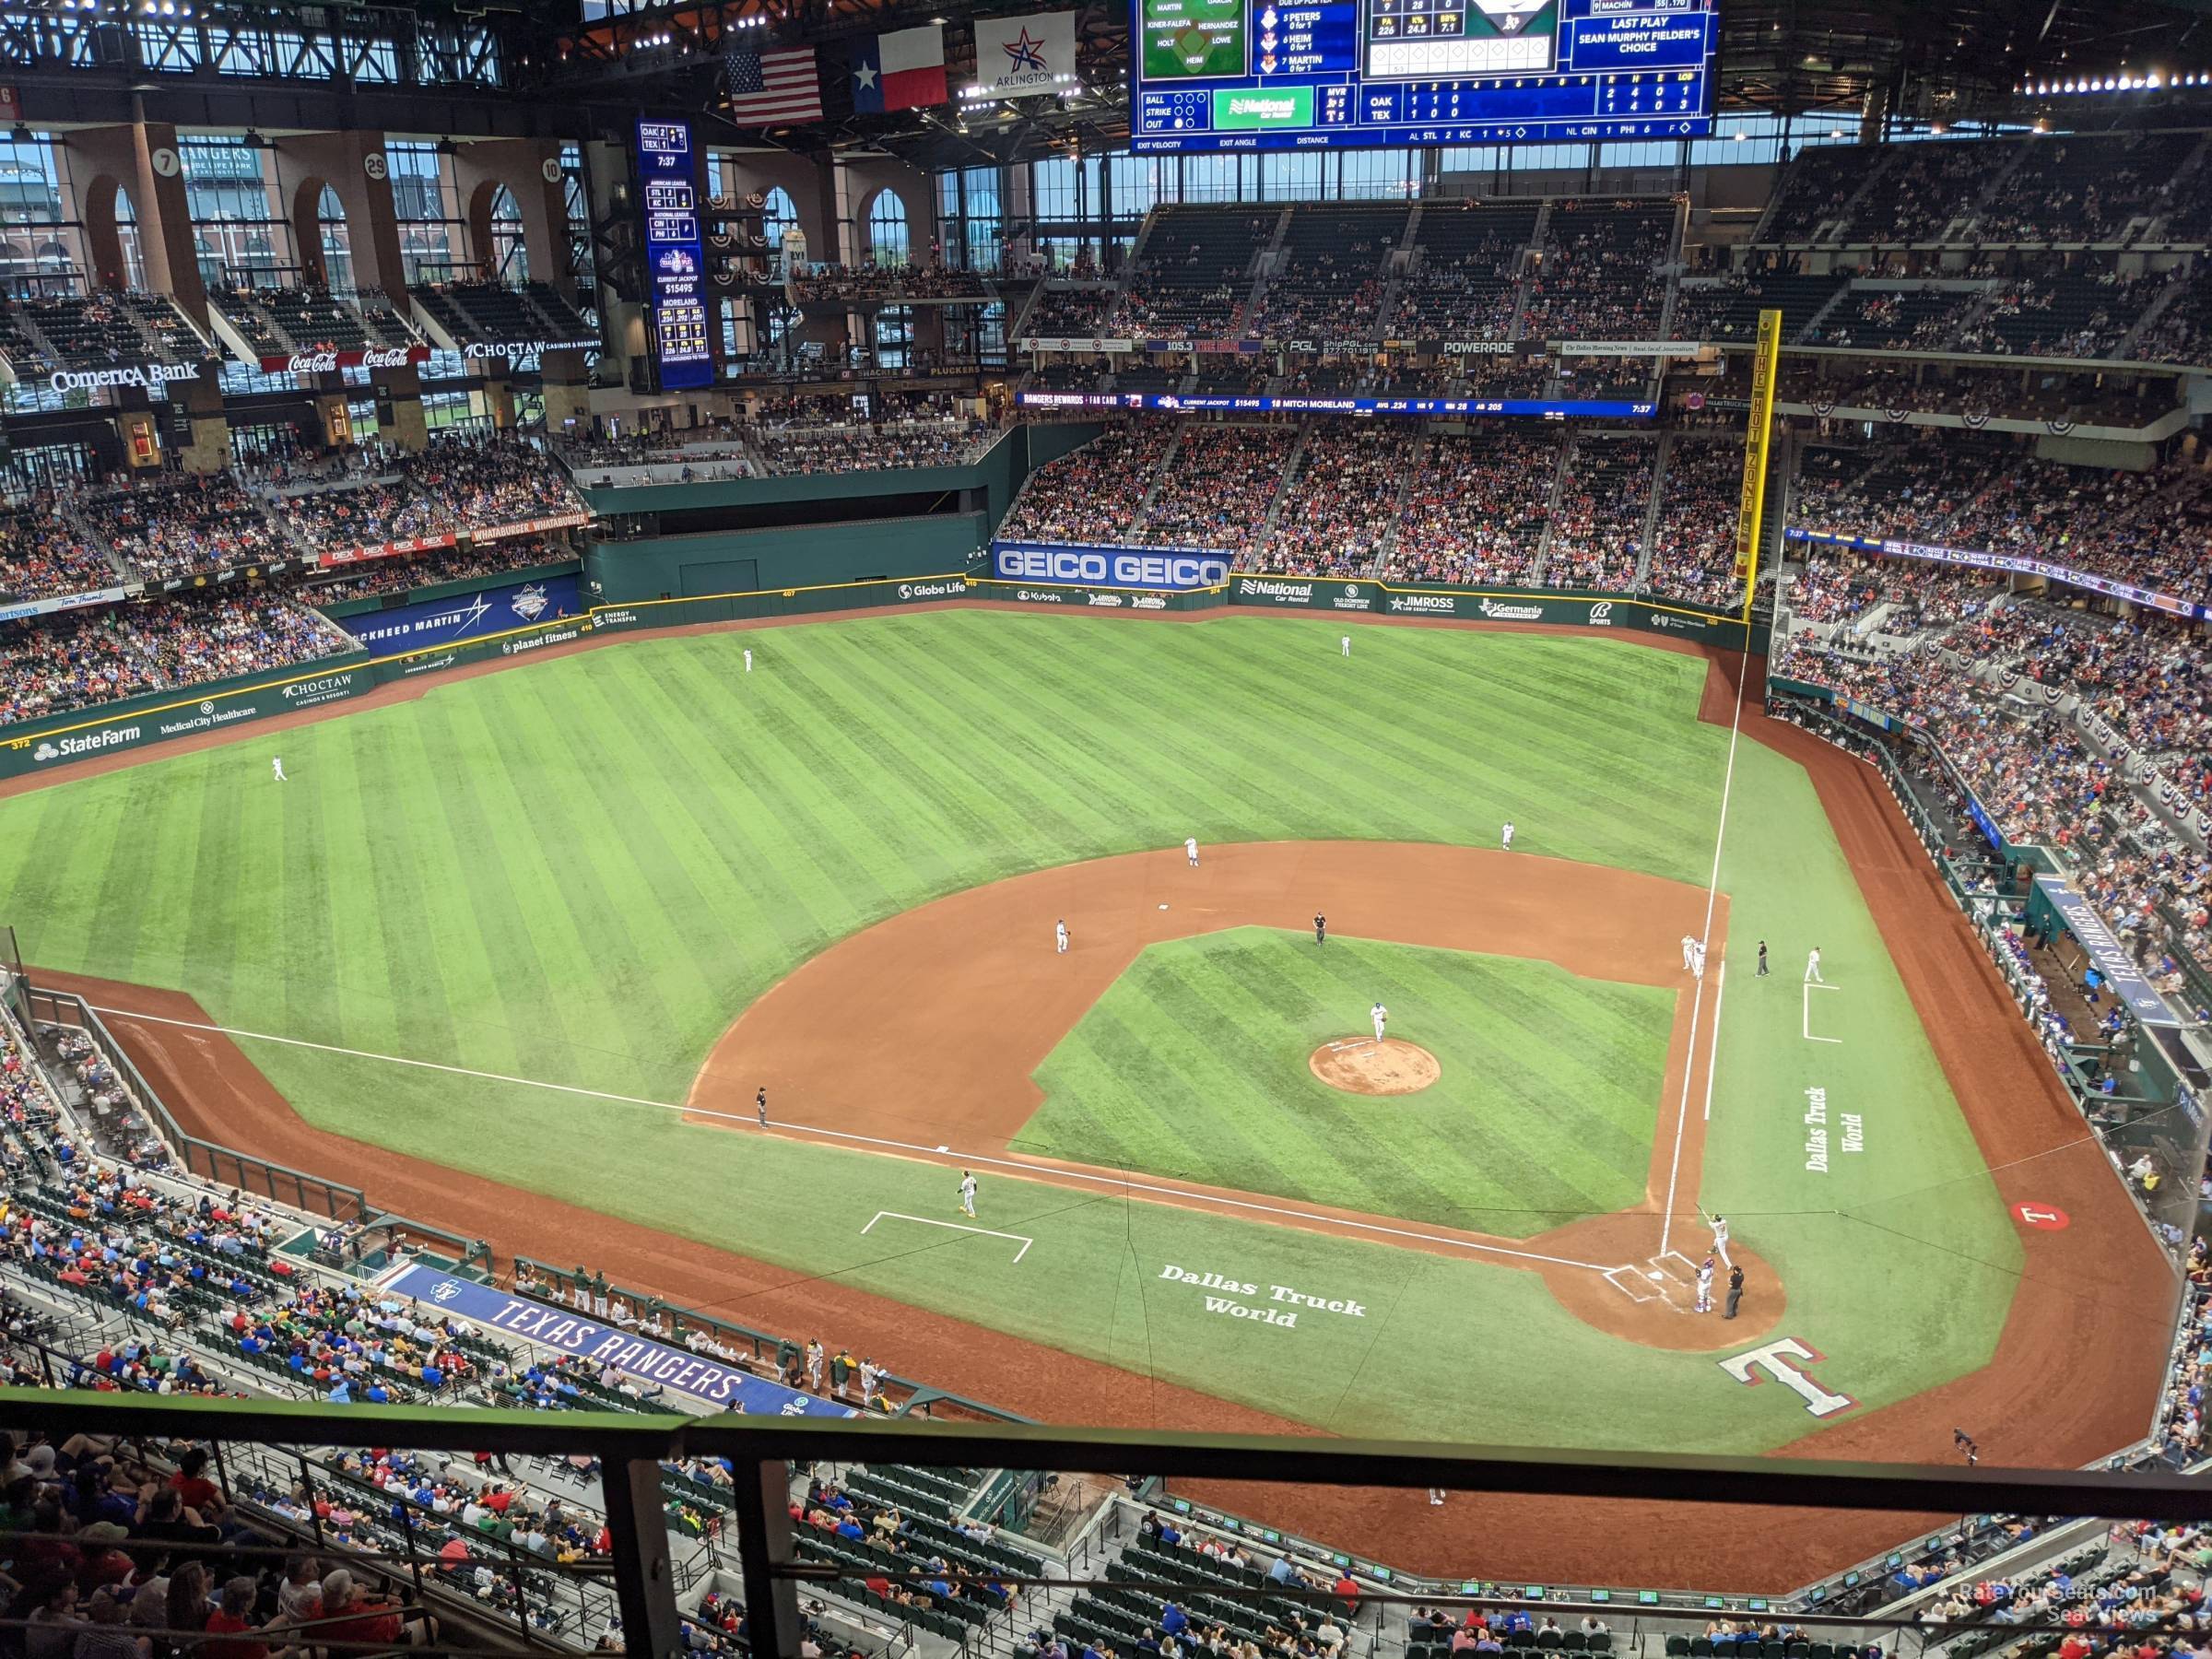 Section 310 at Globe Life Field 